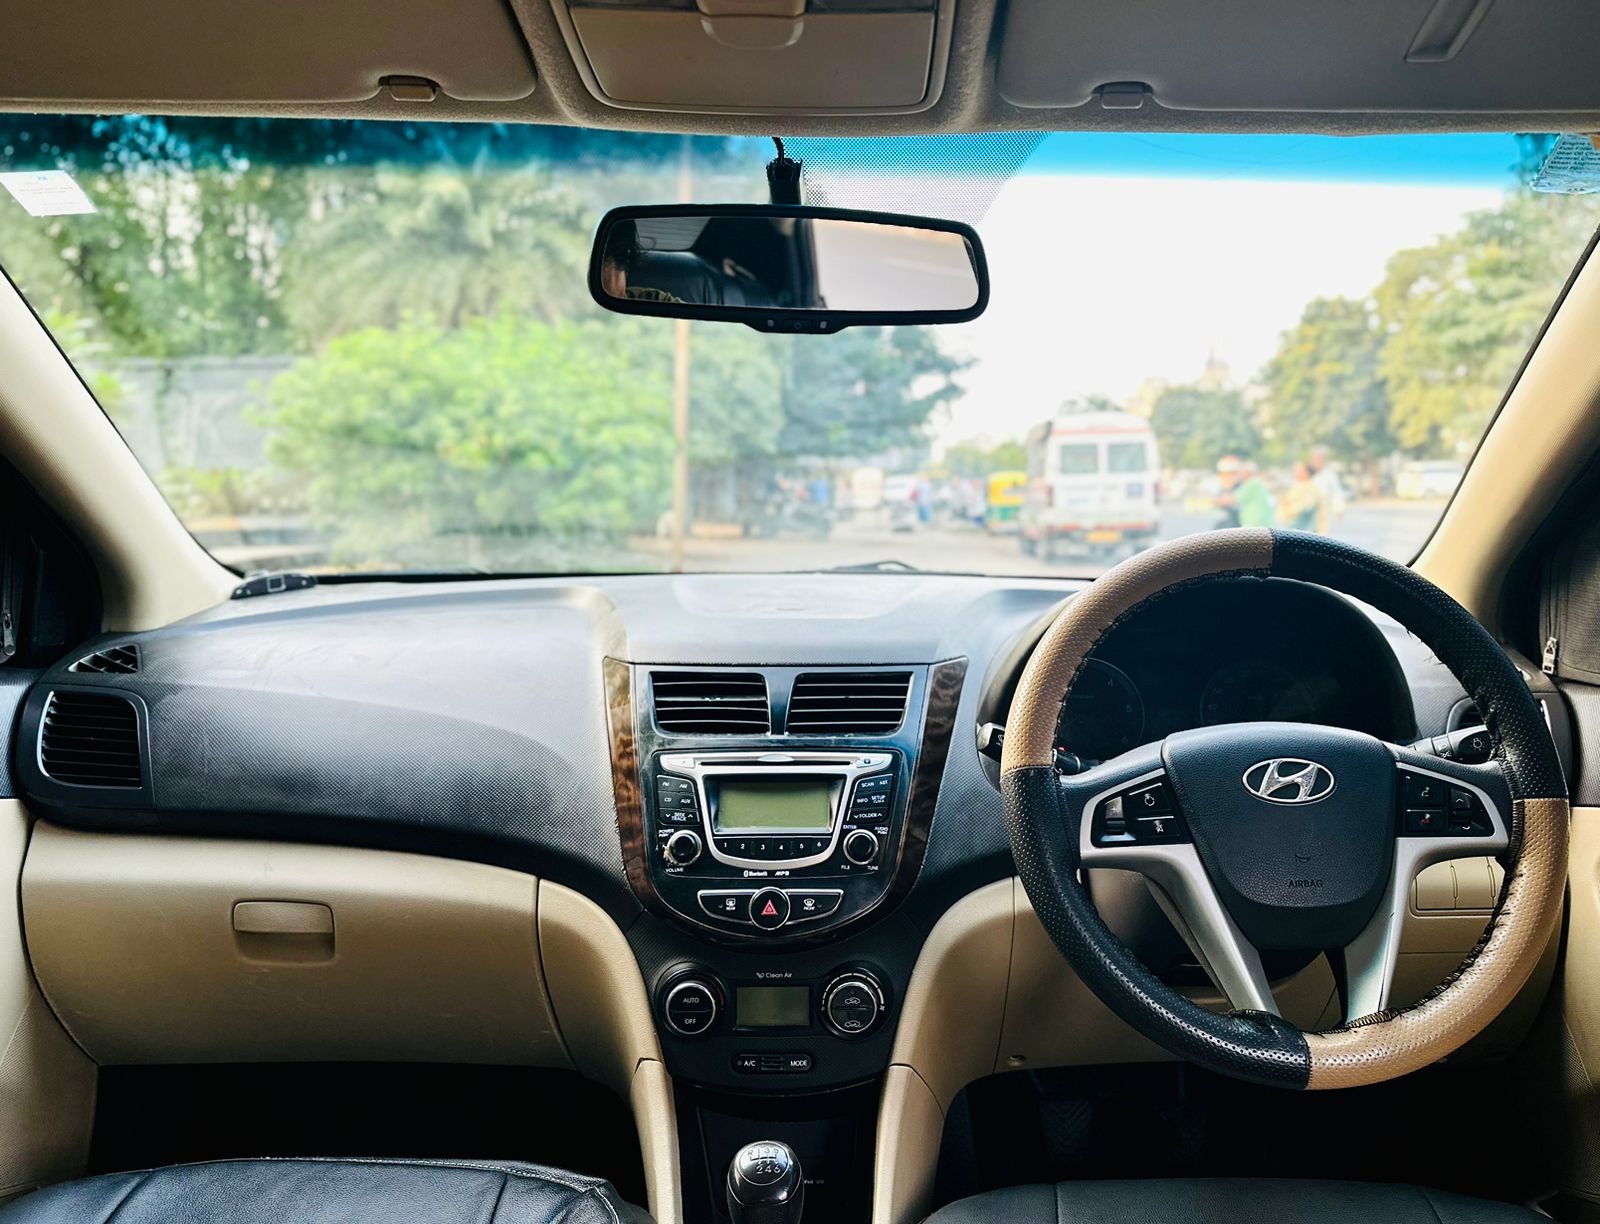 Details View - Hyundai Verna photos - reseller,reseller marketplace,advetising your products,reseller bazzar,resellerbazzar.in,india's classified site,Hyundai Verna, used Hyundai Verna, old Hyundai Verna, old Hyundai Verna in Vadodara, Hyundai Verna in Vadodara